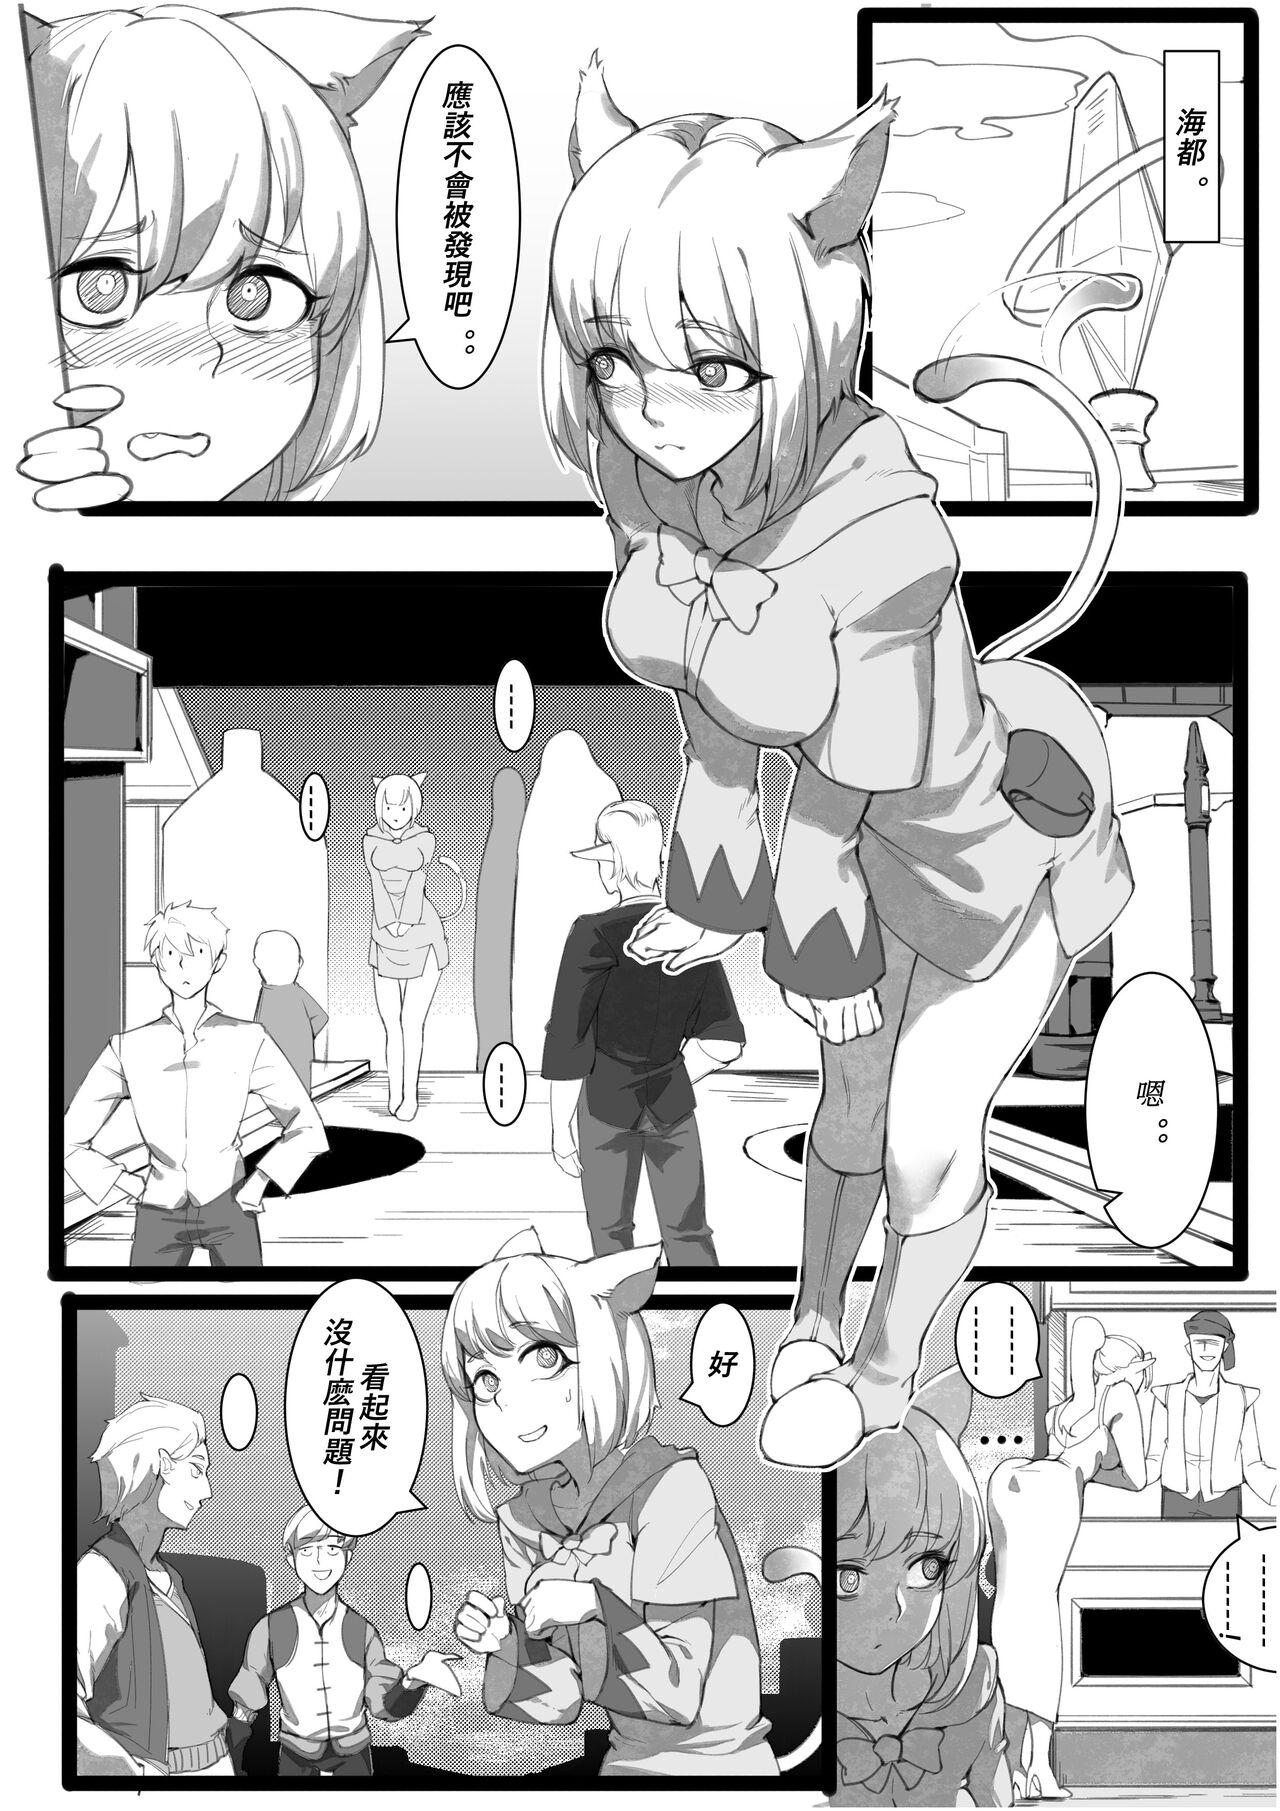 Cat Girl's Daily Life 1&2 7